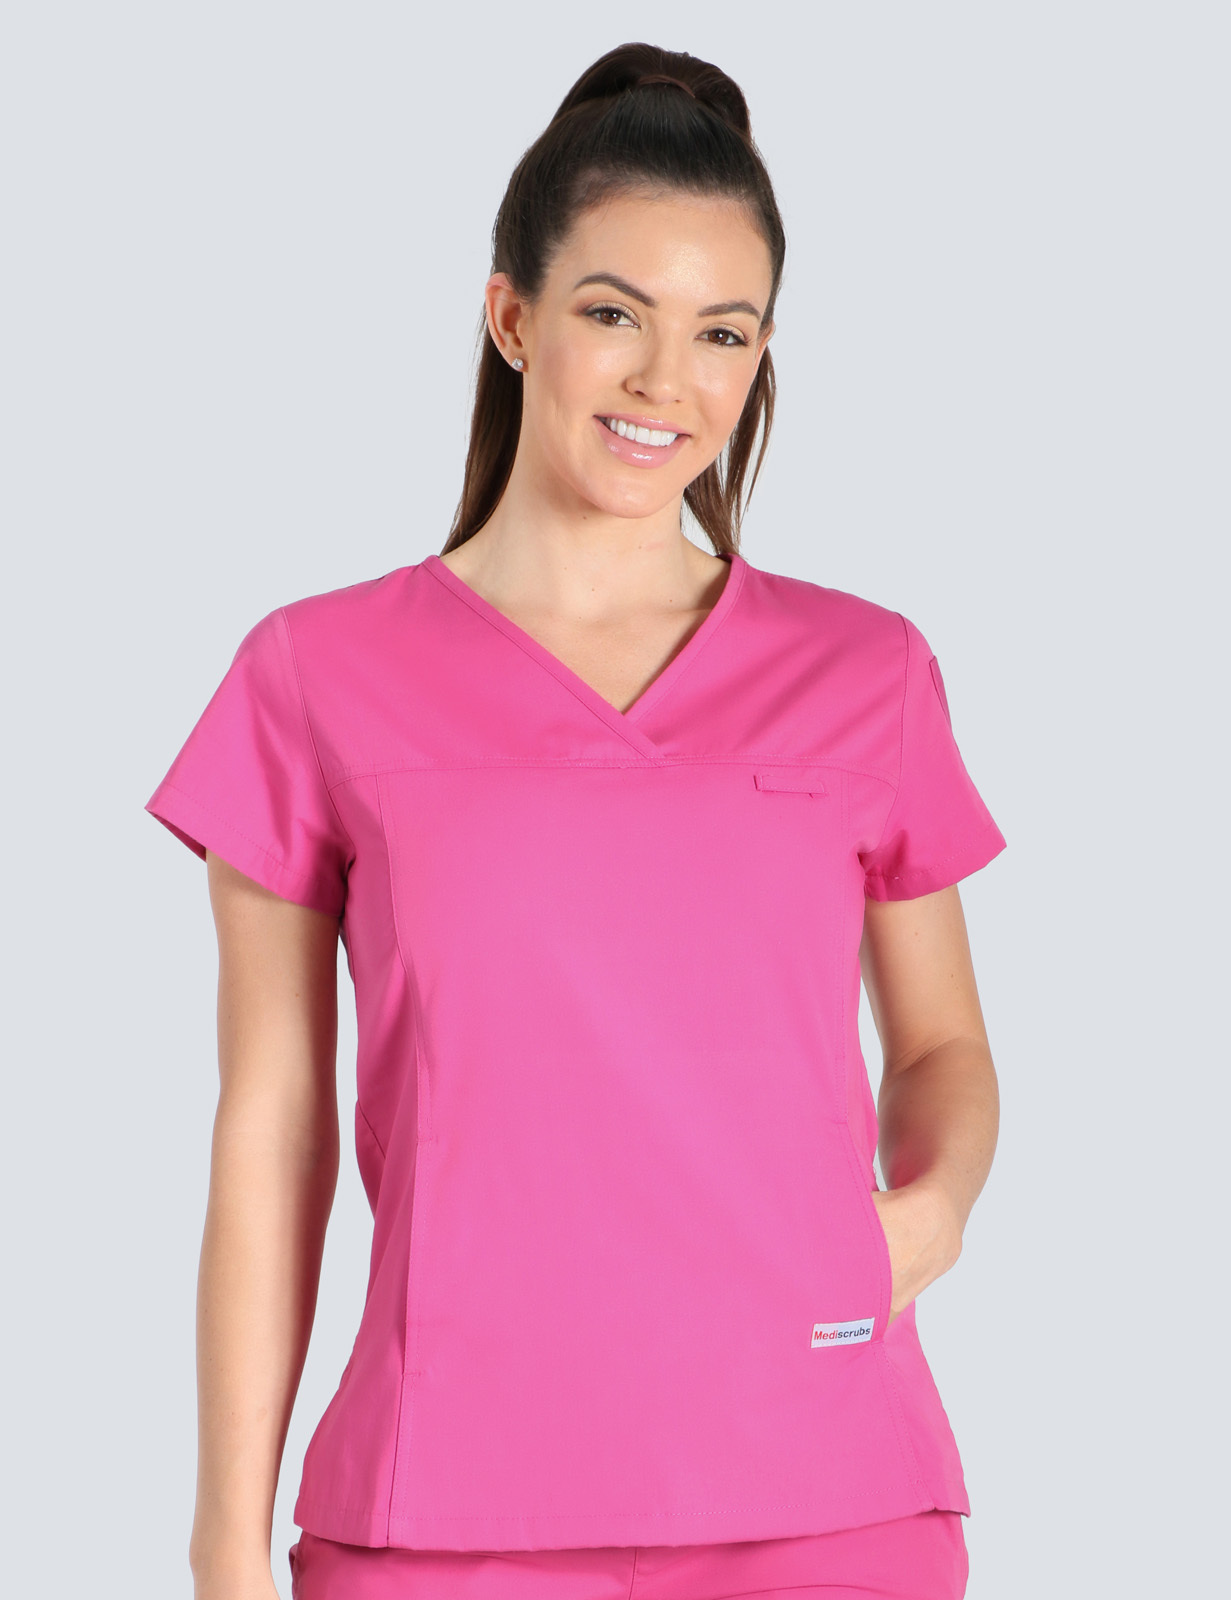 Women's Fit Solid Scrub Top - Pink - X Large